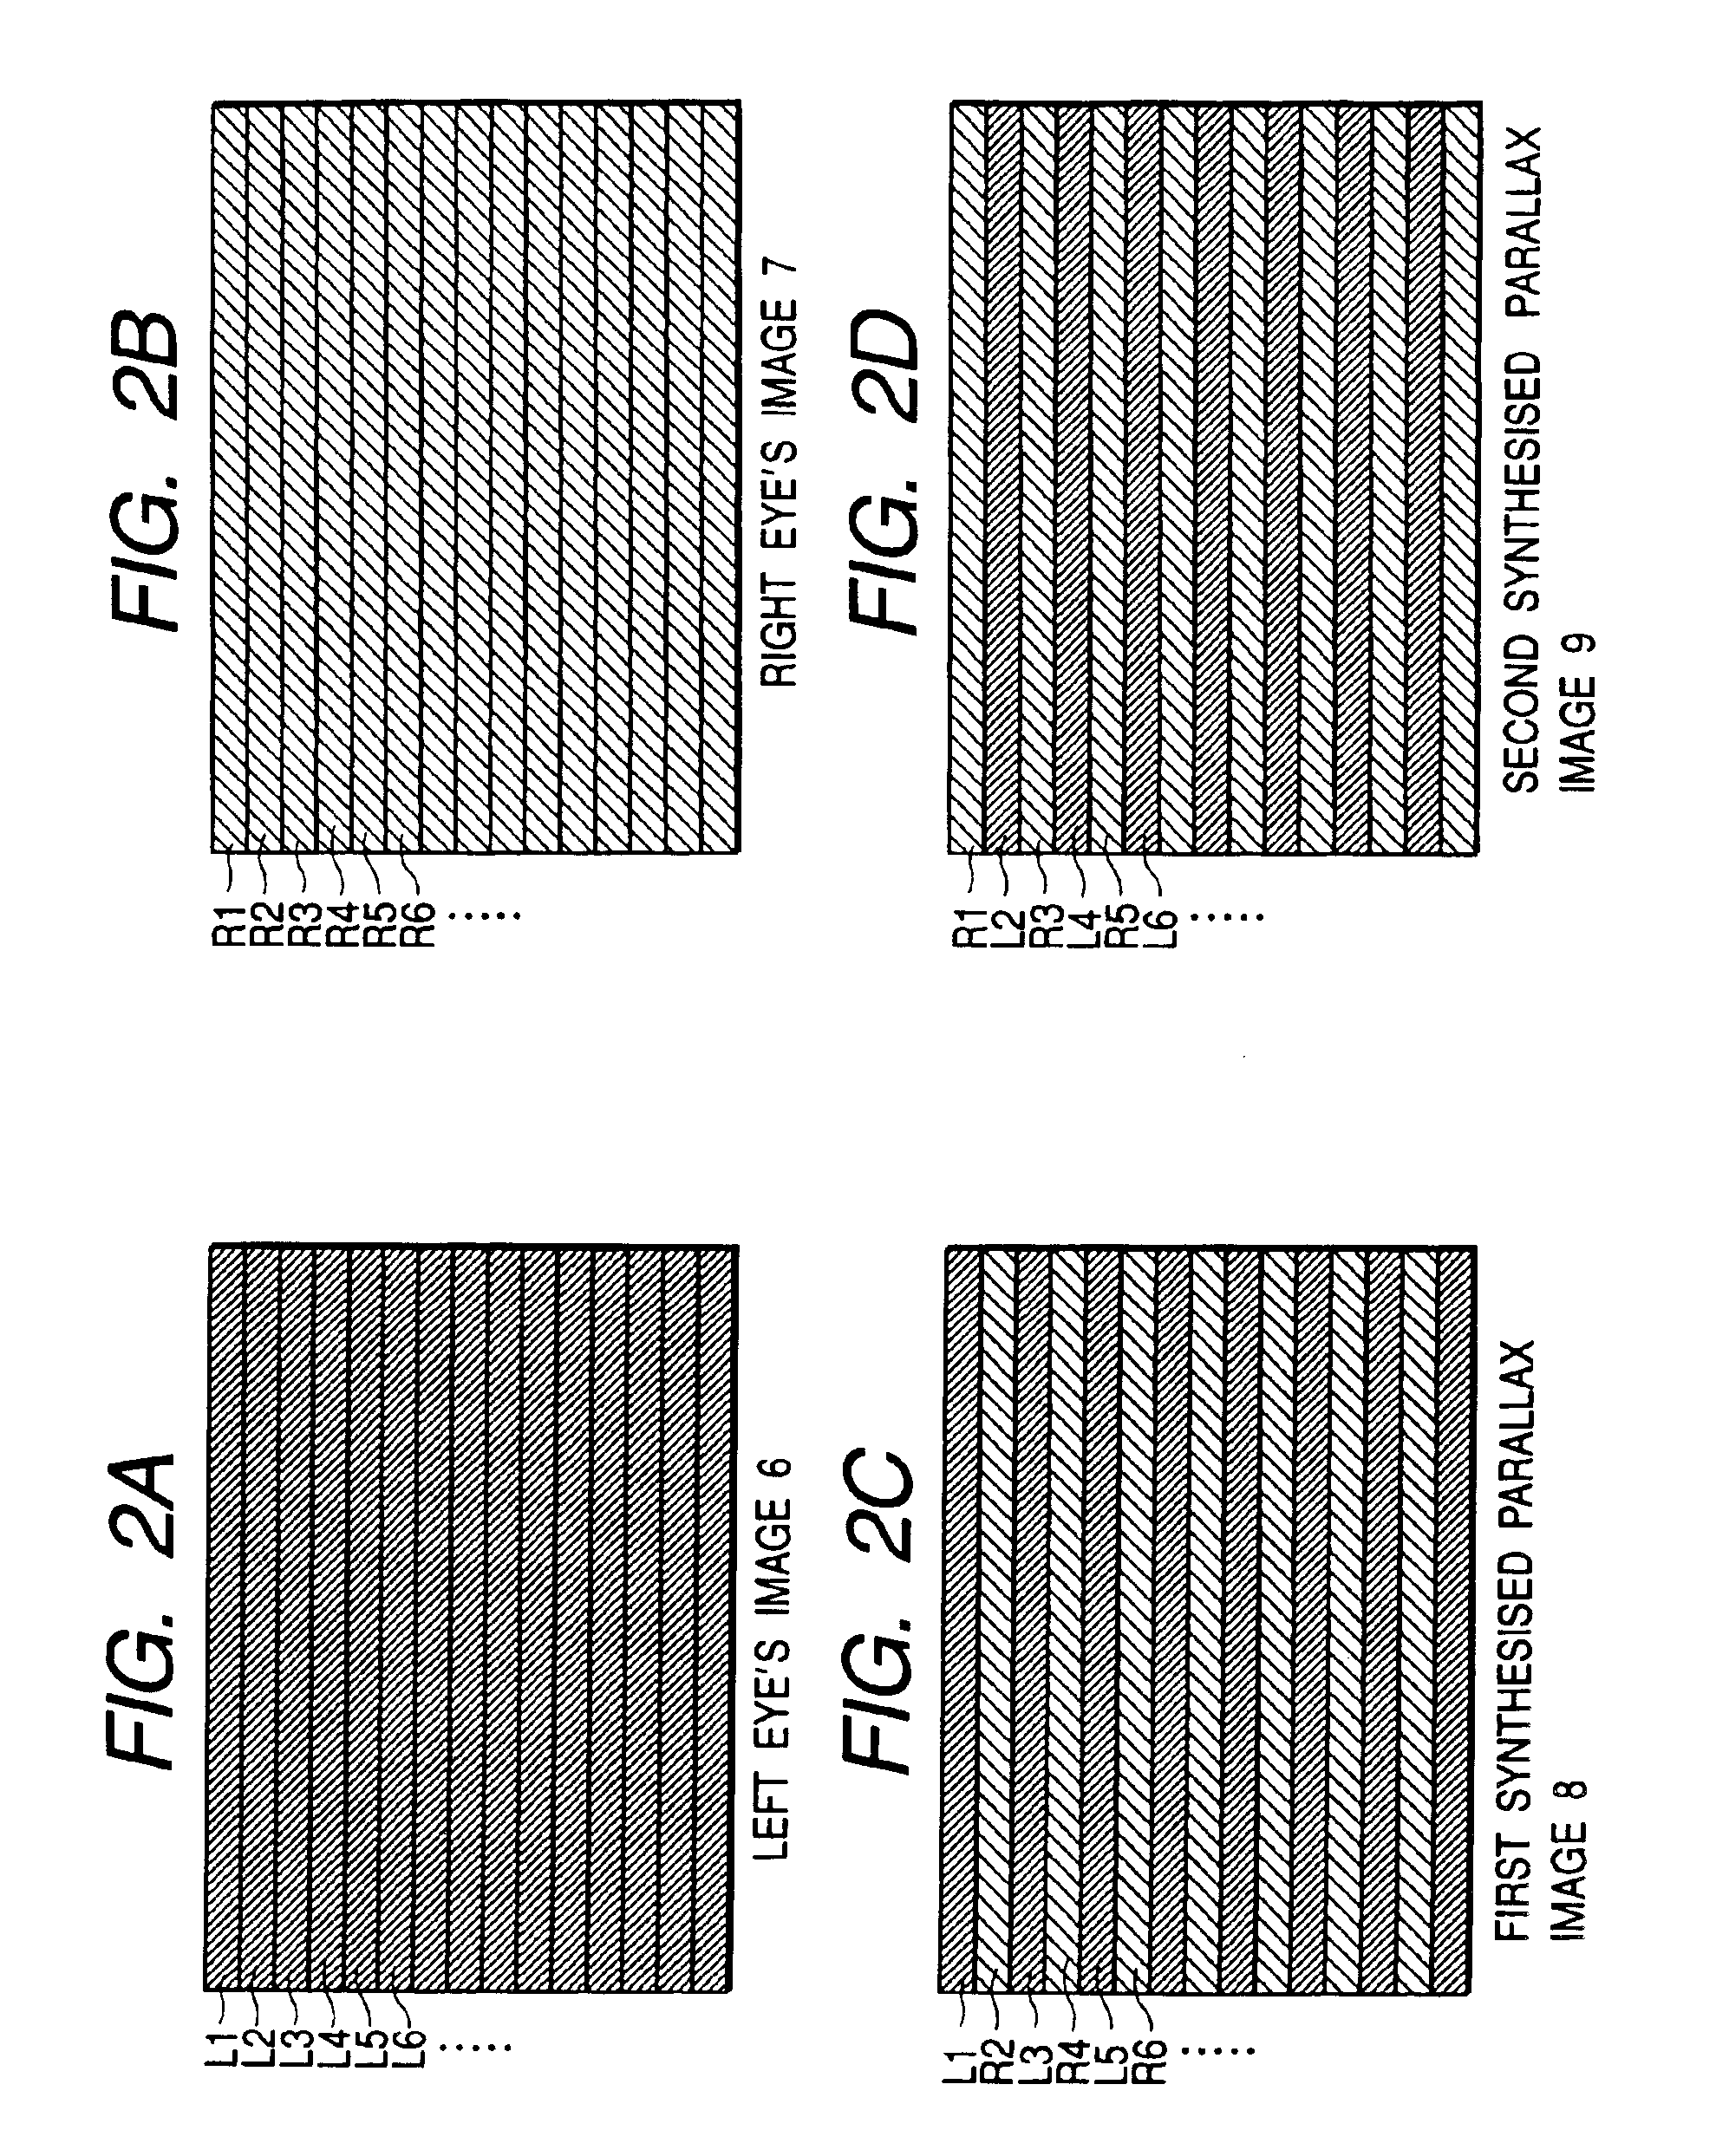 Method and apparatus for stereoscopic image display